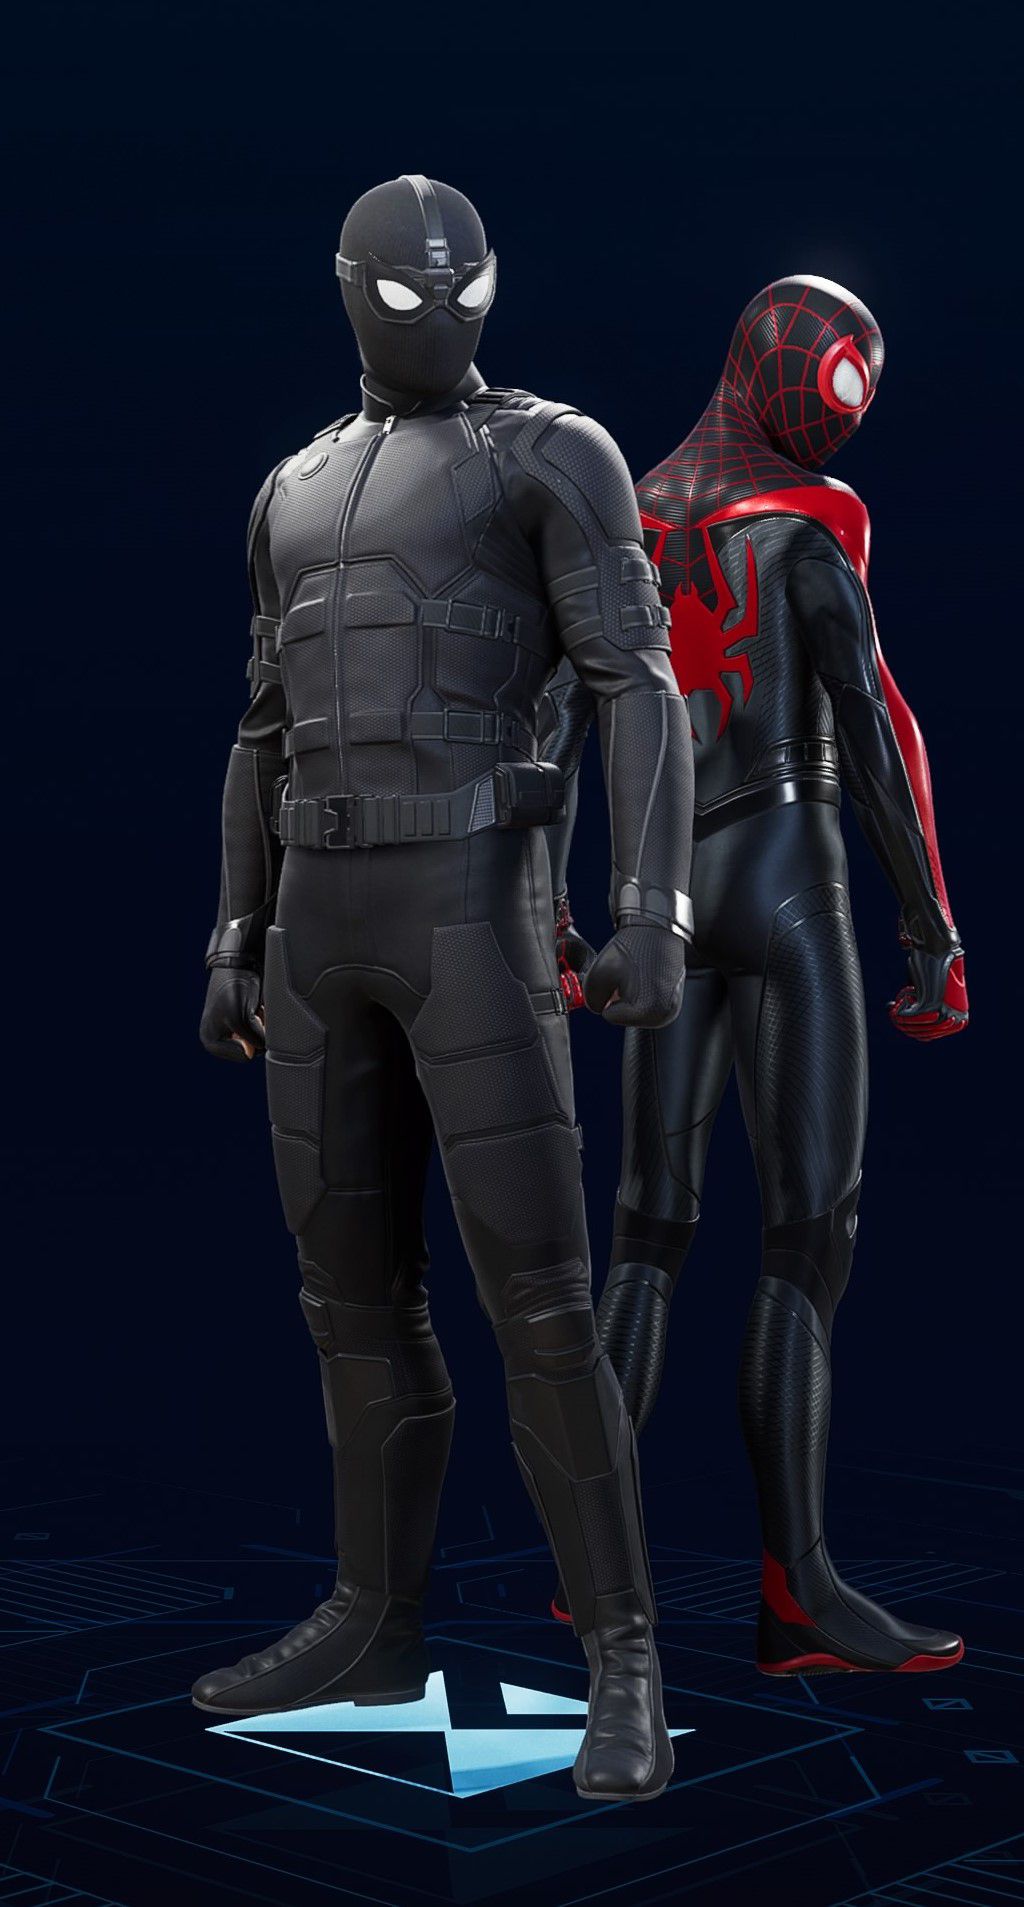 Peter Parker stands in his Stealth Suit in the suit selection screen of Spider-Man 2.